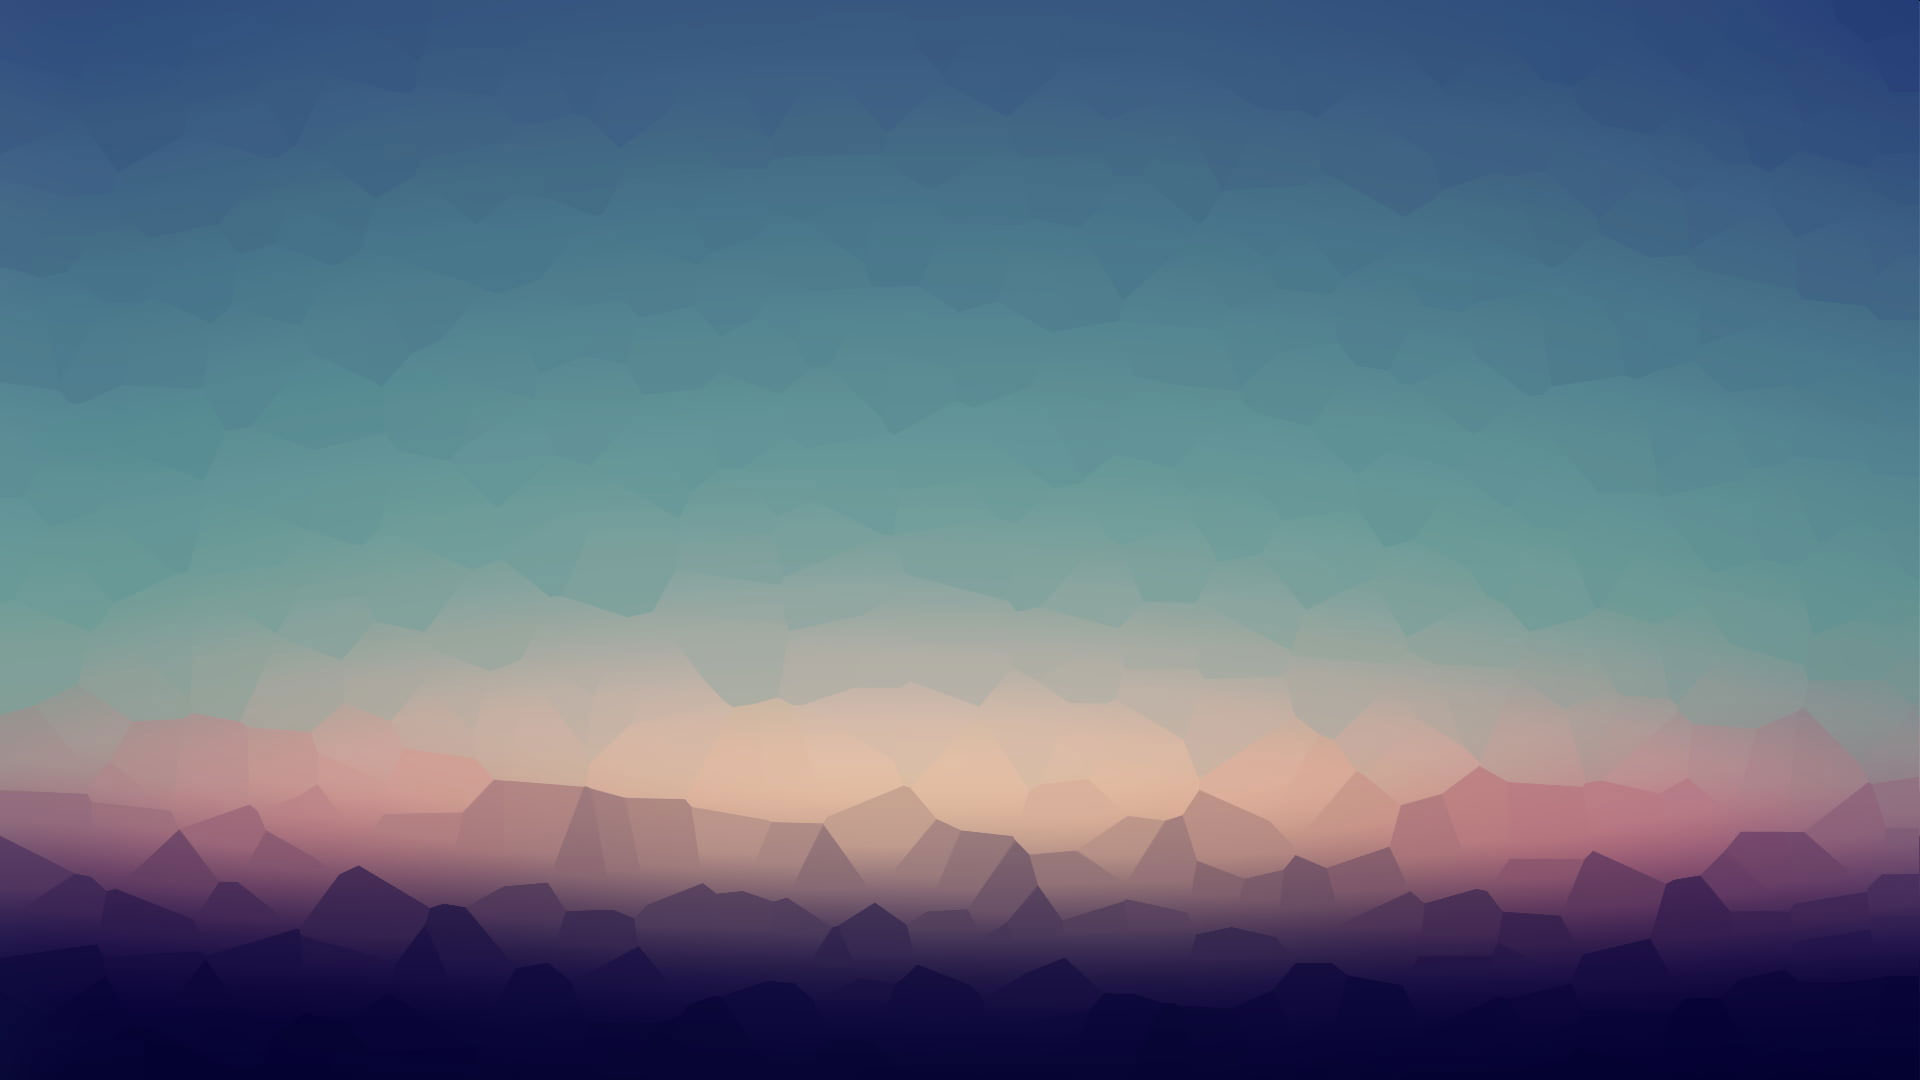 Polygon wallpaper, digital art, simple background, abstract, mosaic, shapes, low poly